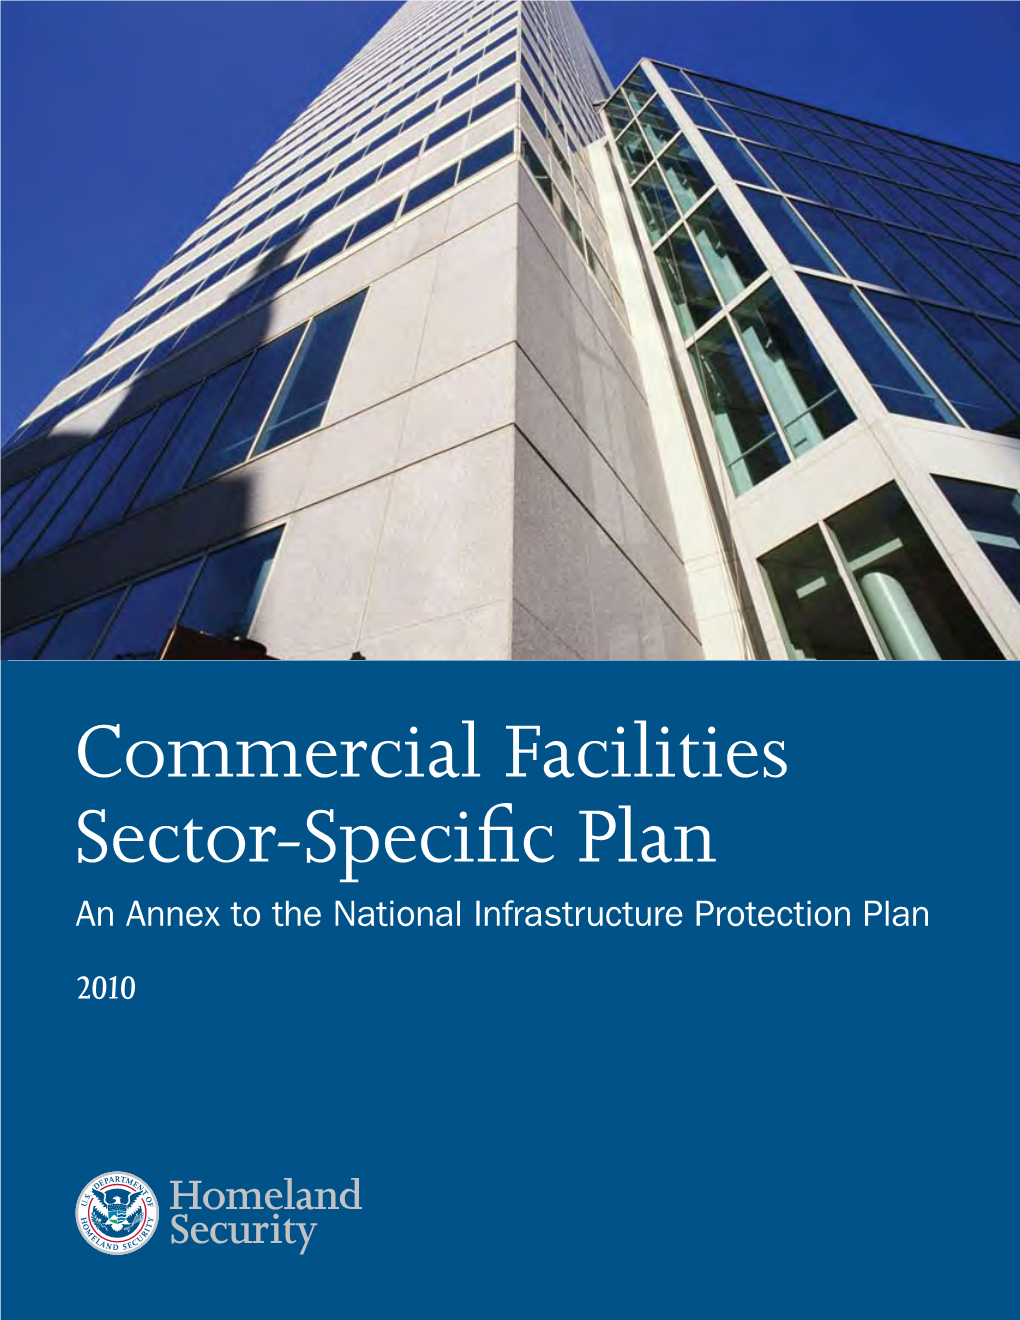 Commercial Facilities Sector-Specific Plan 2010